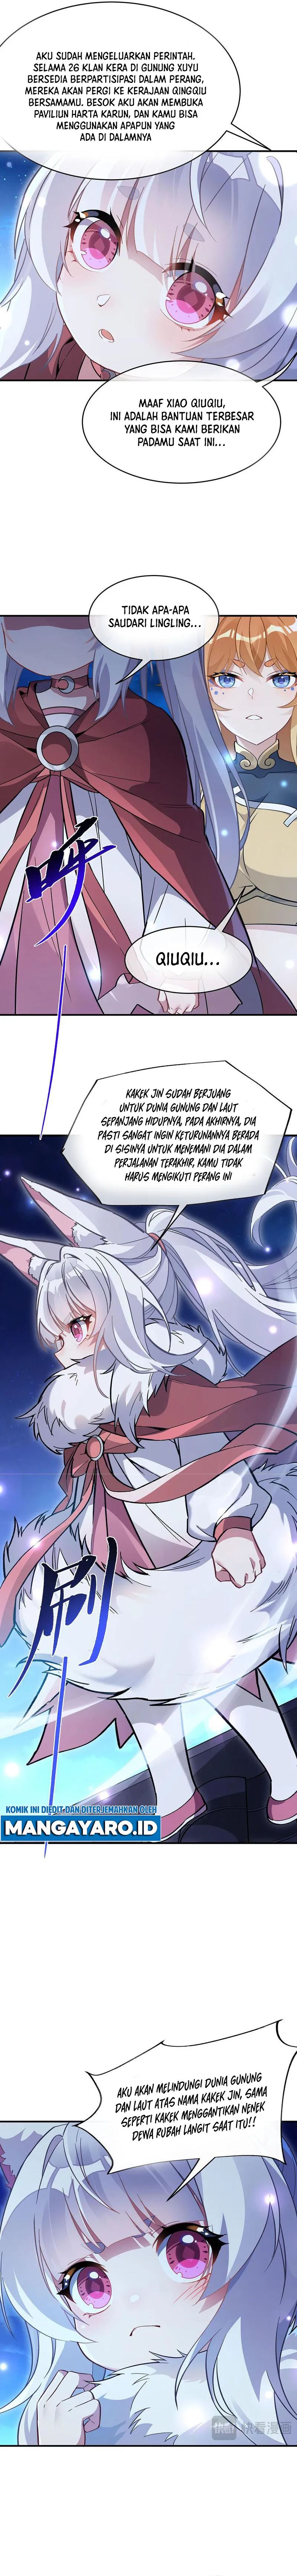 Dilarang COPAS - situs resmi www.mangacanblog.com - Komik my female apprentices are all big shots from the future 230 - chapter 230 231 Indonesia my female apprentices are all big shots from the future 230 - chapter 230 Terbaru 5|Baca Manga Komik Indonesia|Mangacan